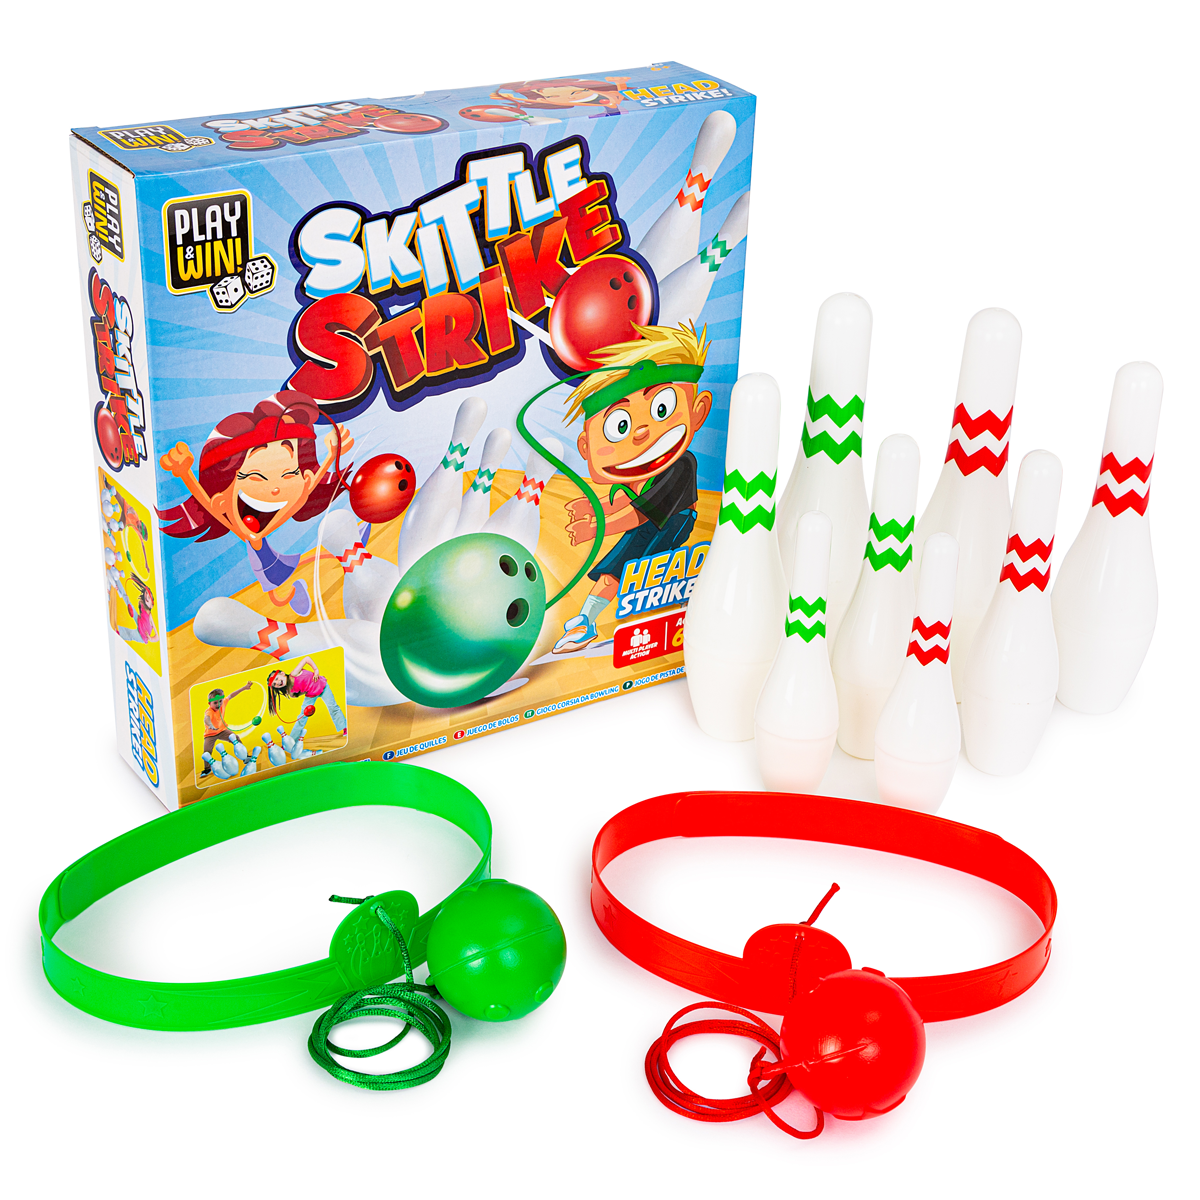 Play and Win Skittle Strike Game